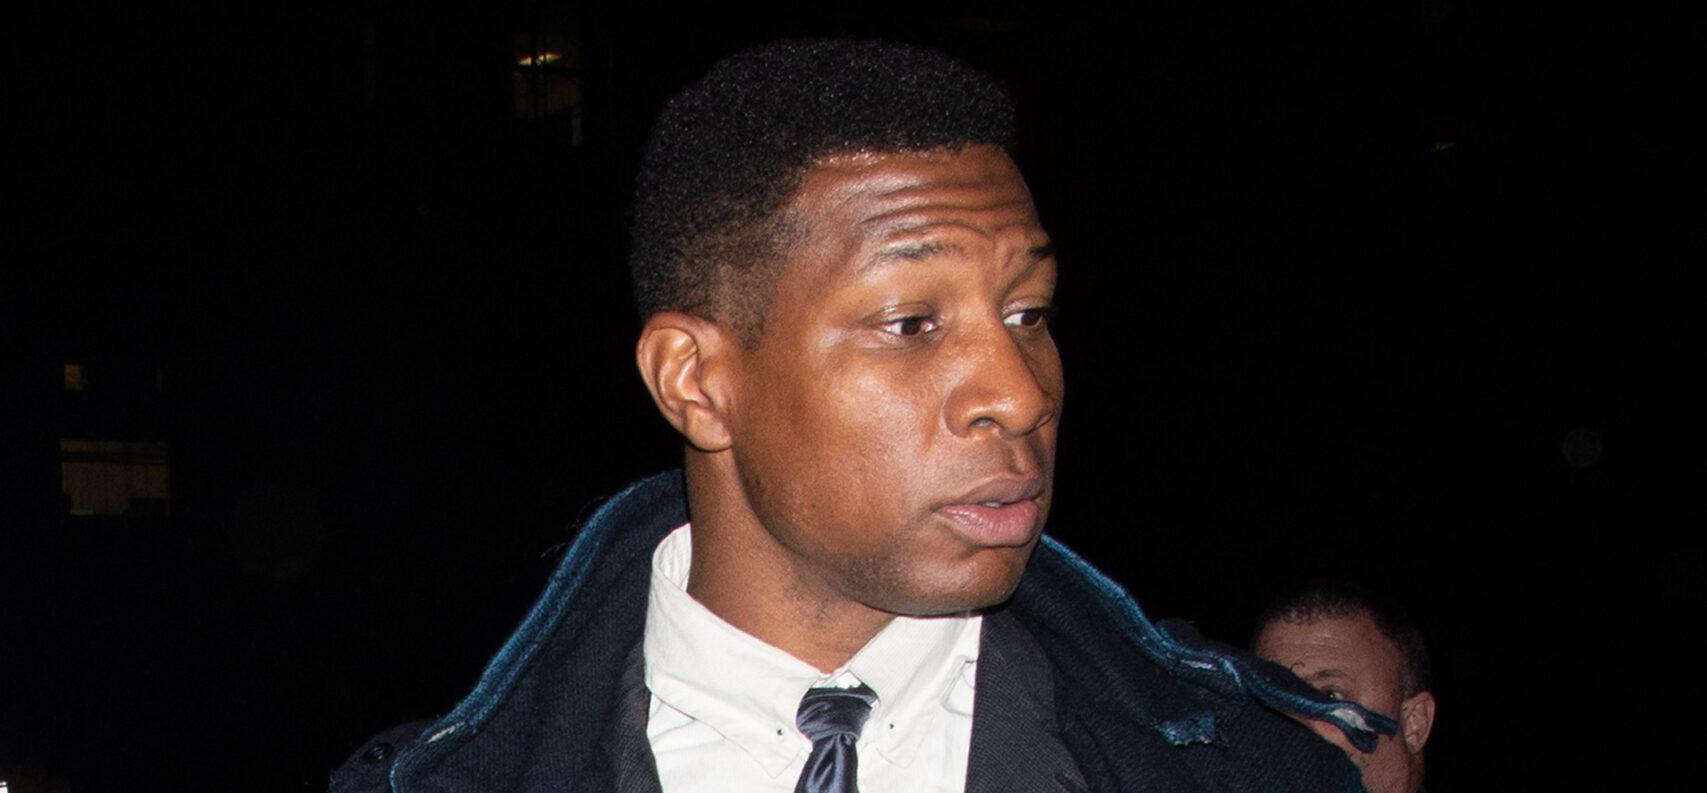 Jonathan Majors Accused Of Physical & Emotional Abuse By Two Ex-Girlfriends